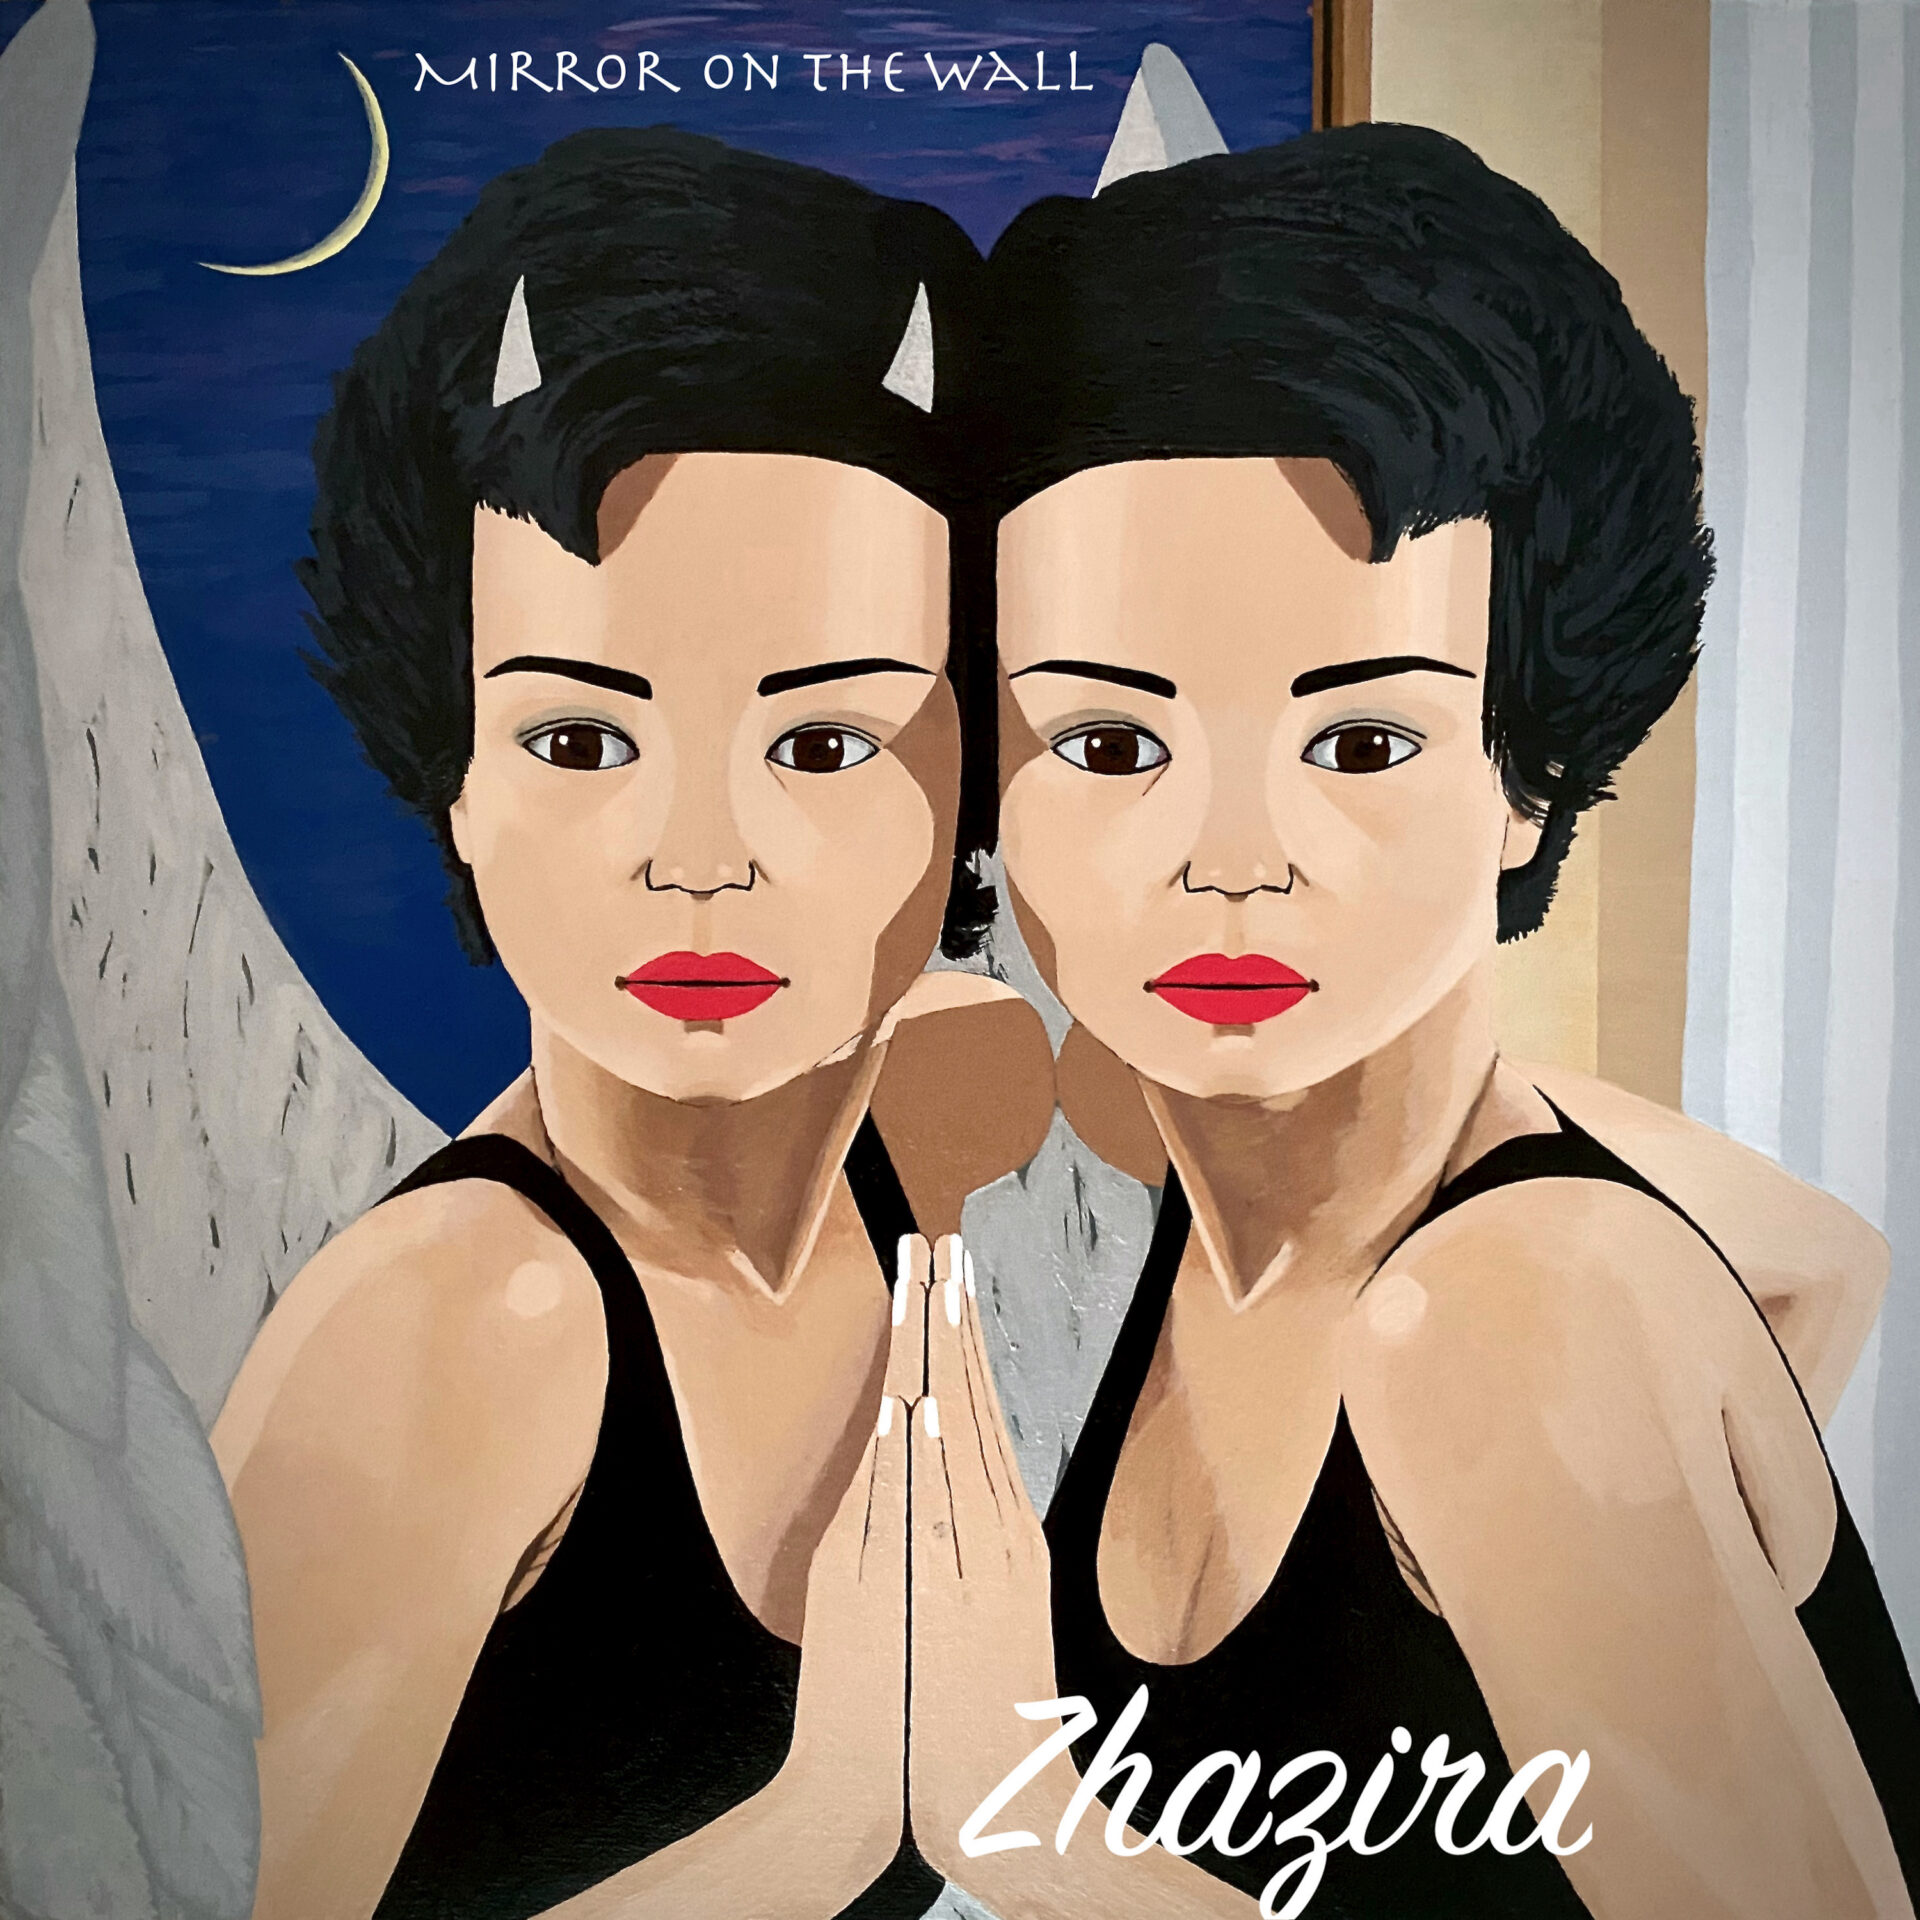 Mirror on the Wall by ZHAZIRA: Review